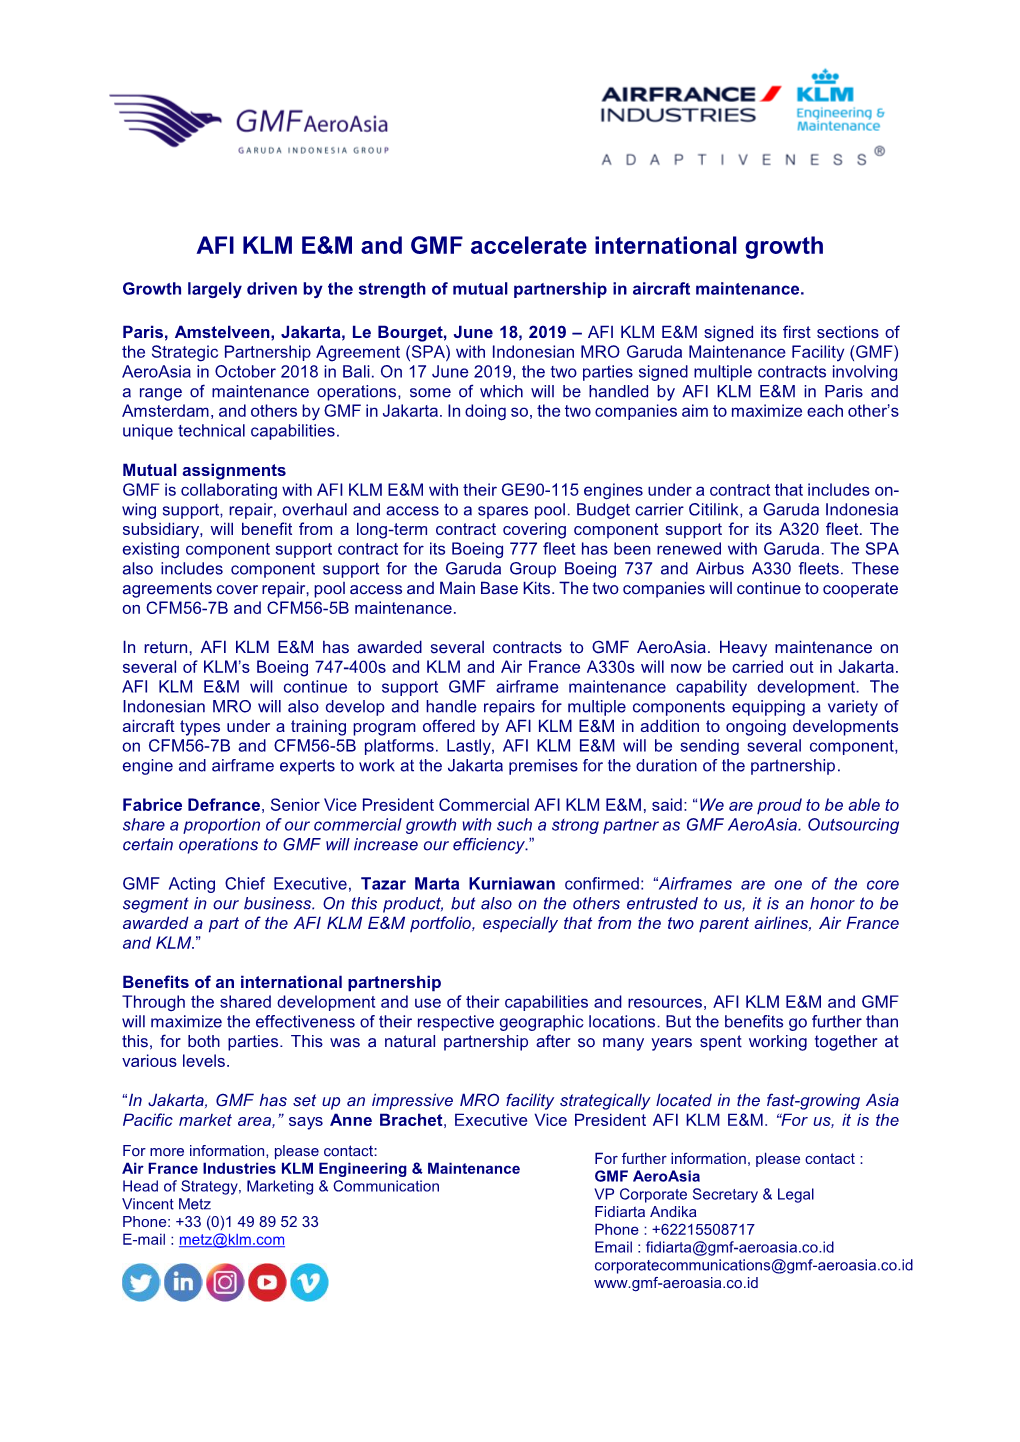 AFI KLM E&M and GMF Accelerate International Growth